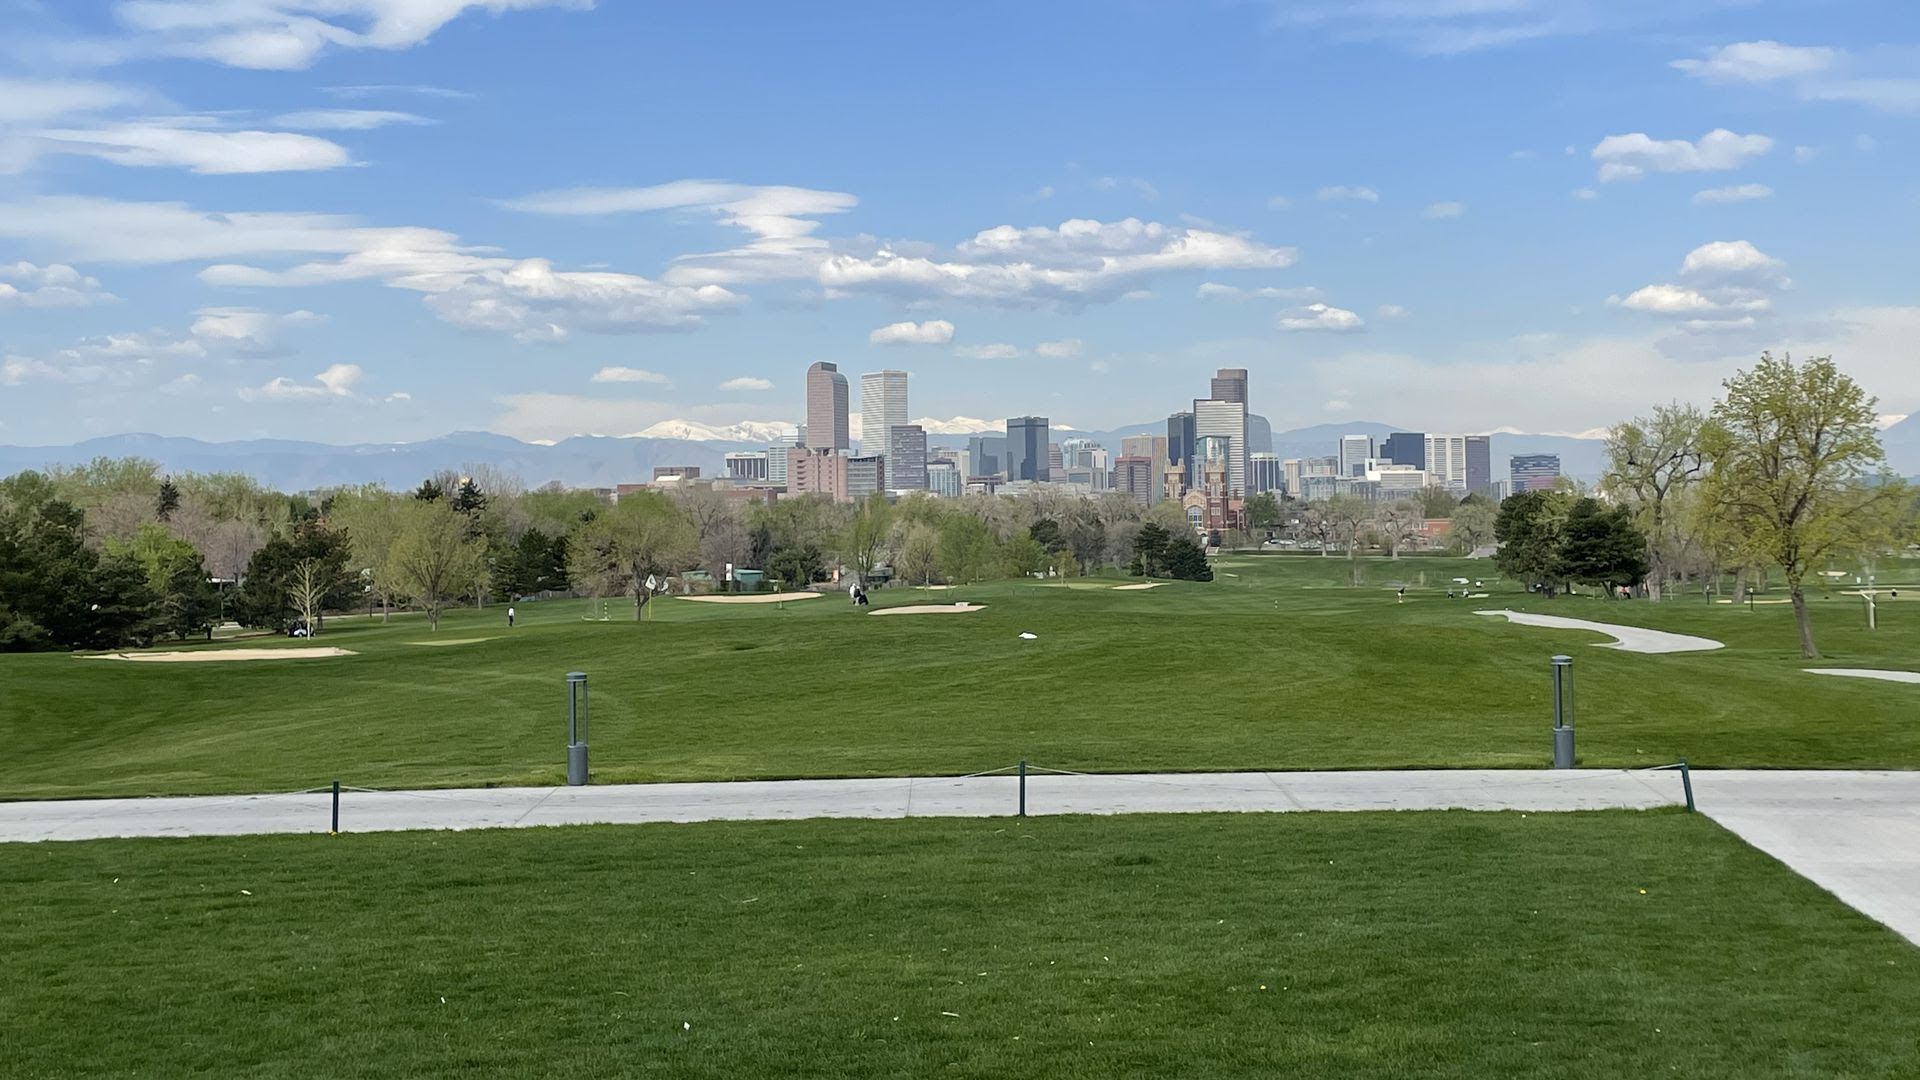 The view from the patio at the City Park Golf Course bar. Photo: John Frank/Axios